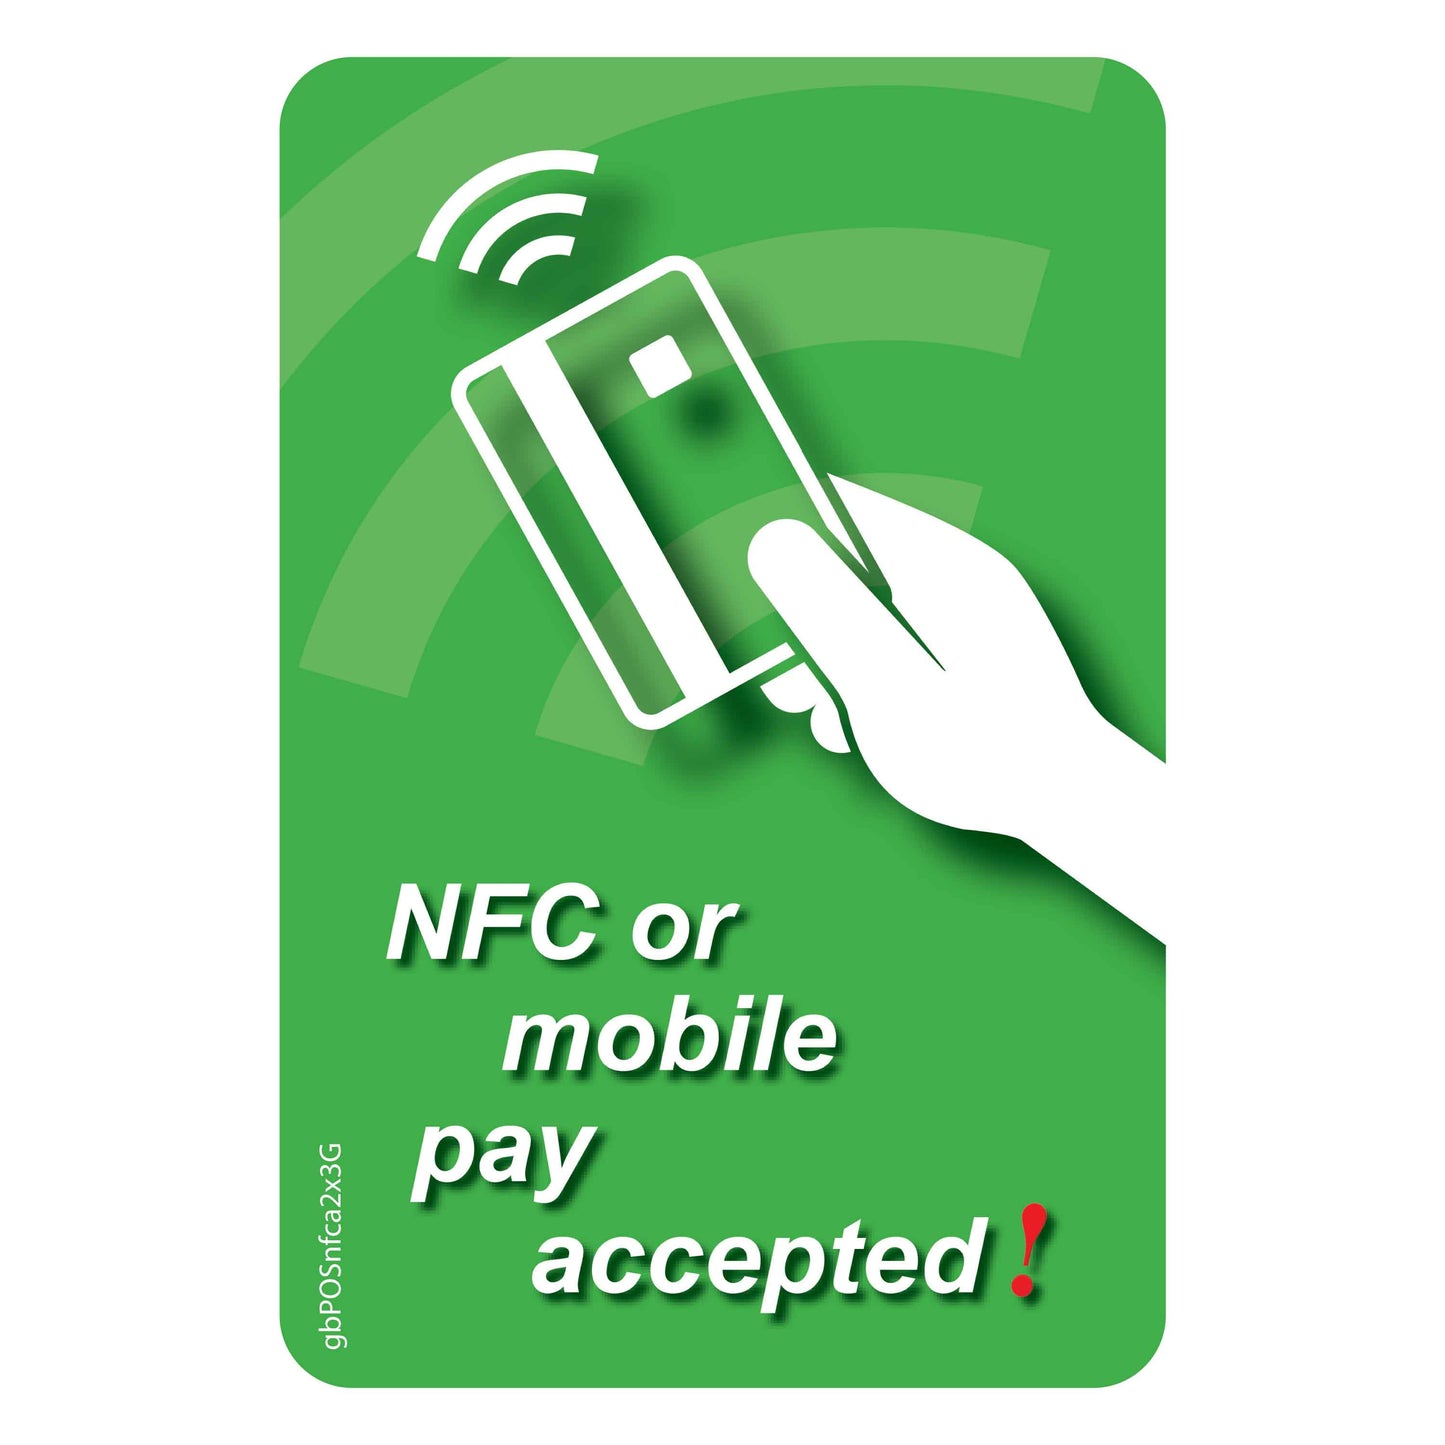 NFC or Mobile Pay Accepted Decal, Green. 2 inches by 3 inches in size. 